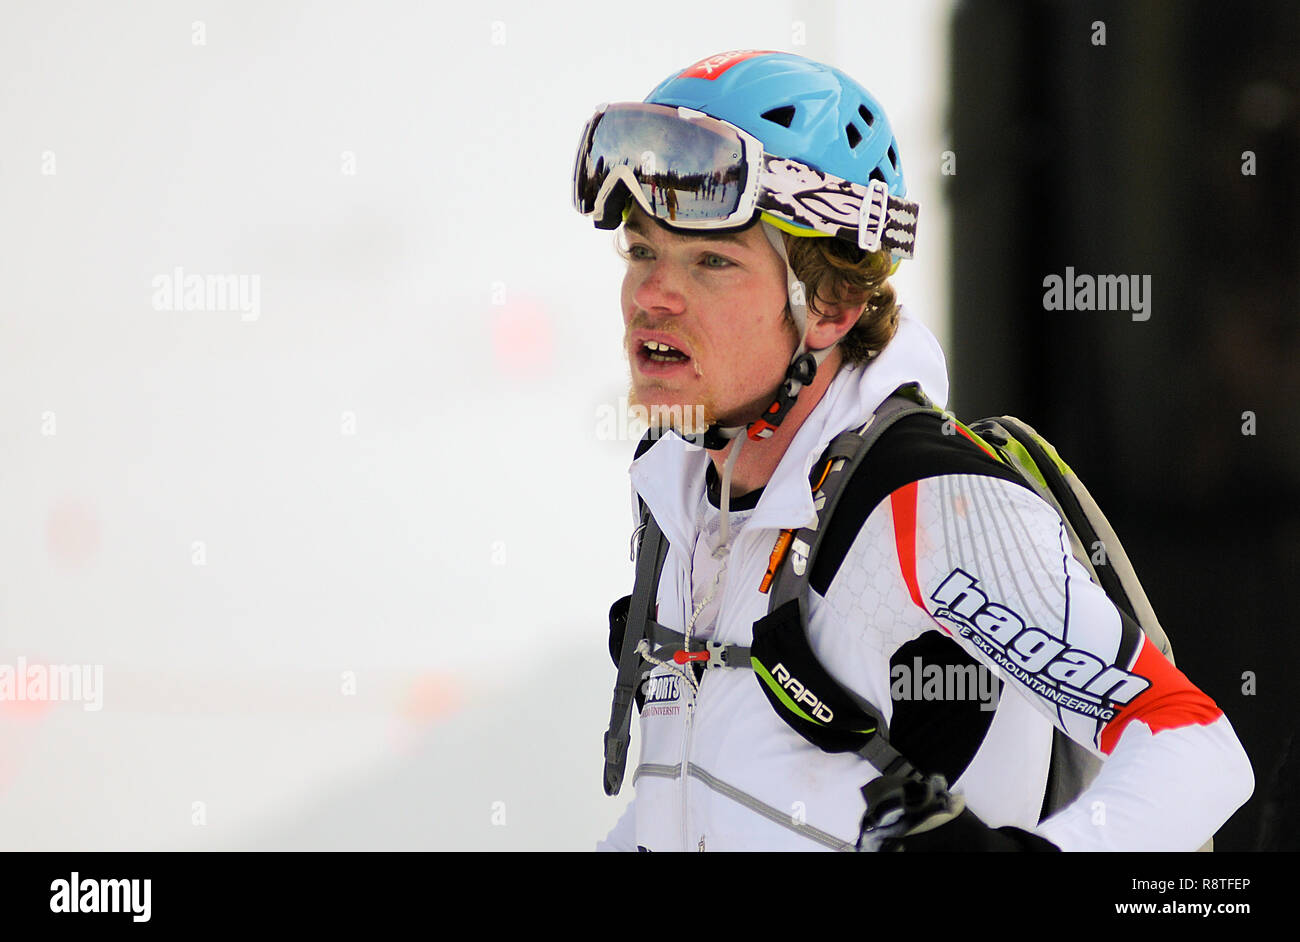 December 15, 2018: Western Colorado State University freshman, Jacob Dewy, following his U20 victory in the difficult United States Ski Mountaineering Association's Individual Race. Arapahoe Basin Ski Area, Dillon, Colorado. Stock Photo